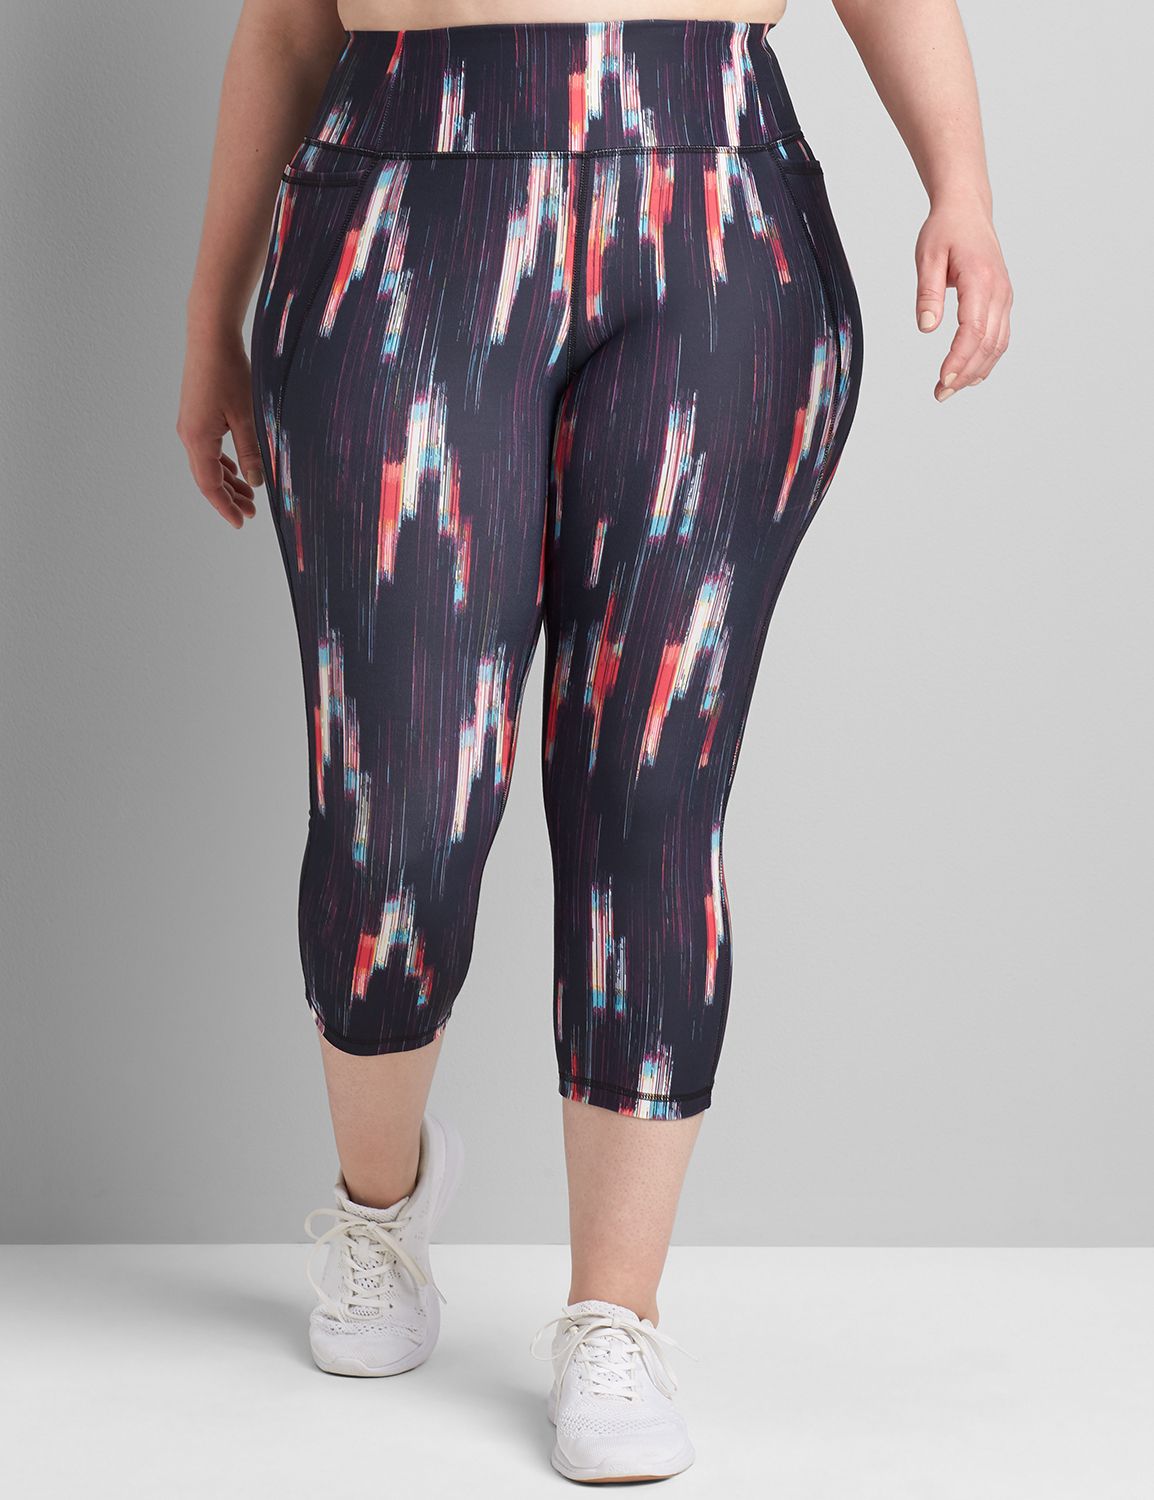 SATINA Coral Capri Leggings with 1 Waistband - High Waisted, One Size